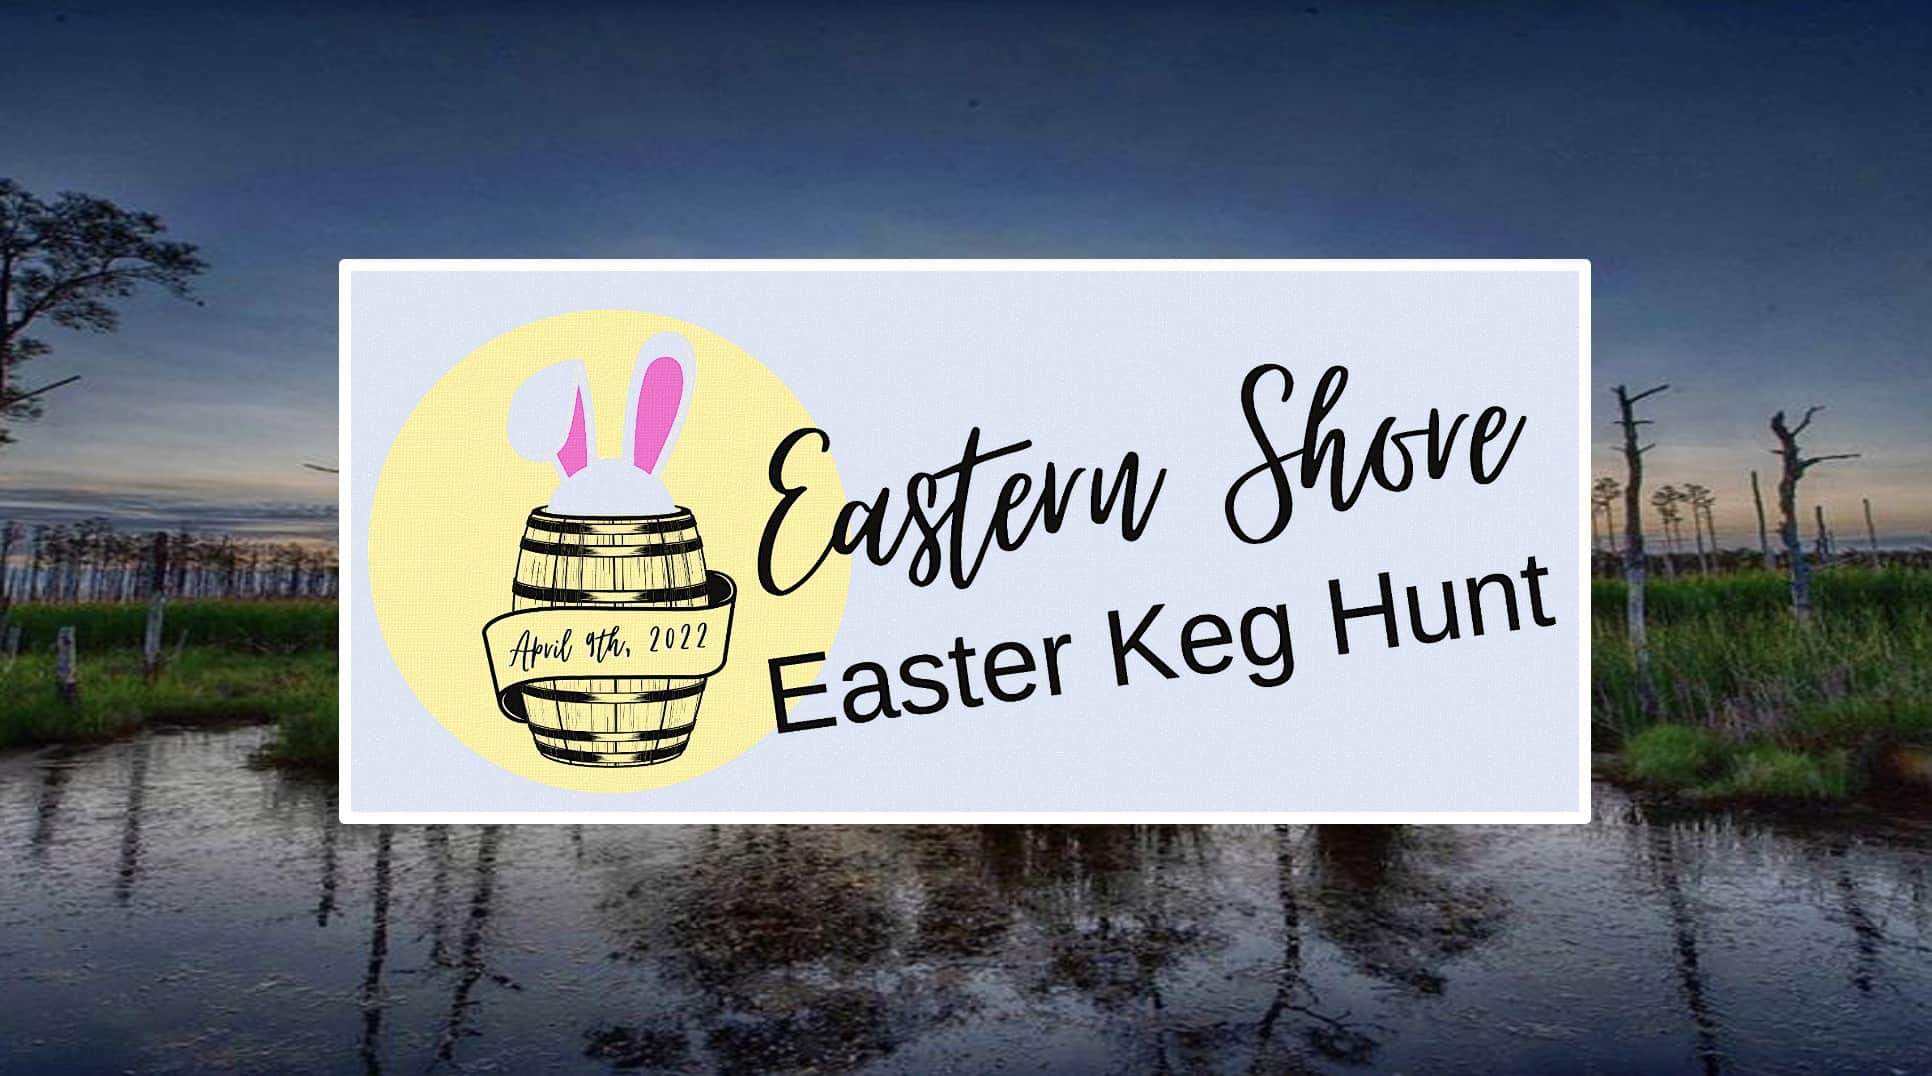 Hop On Over and Join the Eastern Shore Easter Keg Hunt